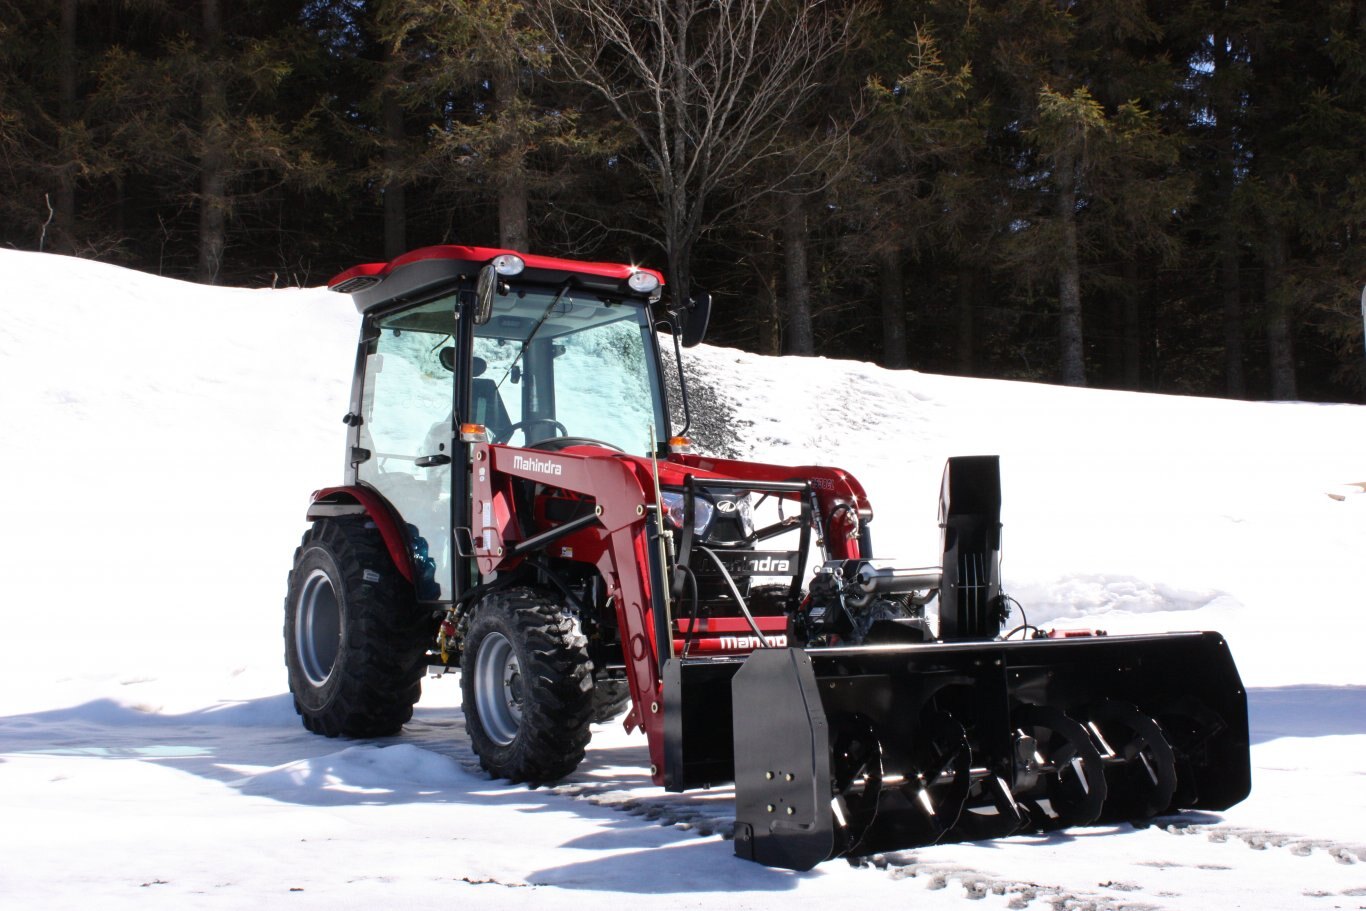 Bercomac 66? Vantage Snowblower for tractors equipped with Skid Steer style attach